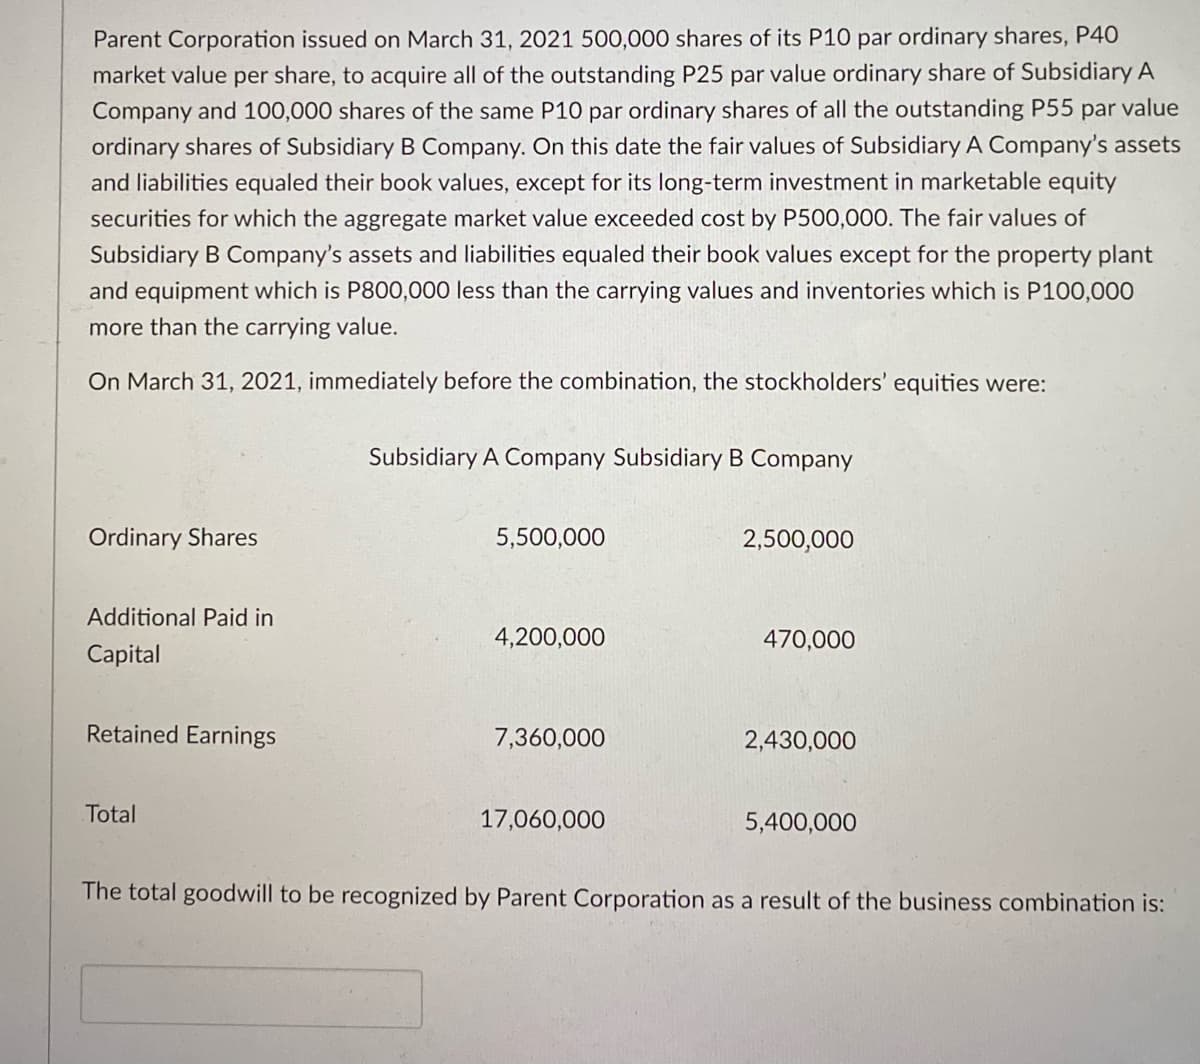 Parent Corporation issued on March 31, 2021 500,000 shares of its P10 par ordinary shares, P40
market value per share, to acquire all of the outstanding P25 par value ordinary share of Subsidiary A
Company and 100,000 shares of the same P10 par ordinary shares of all the outstanding P55 par value
ordinary shares of Subsidiary B Company. On this date the fair values of Subsidiary A Company's assets
and liabilities equaled their book values, except for its long-term investment in marketable equity
securities for which the aggregate market value exceeded cost by P500,000. The fair values of
Subsidiary B Company's assets and liabilities equaled their book values except for the property plant
and equipment which is P800,000 less than the carrying values and inventories which is P100,000
more than the carrying value.
On March 31, 2021, immediately before the combination, the stockholders' equities were:
Subsidiary A Company Subsidiary B Company
Ordinary Shares
5,500,000
2,500,000
Additional Paid in
4,200,000
470,000
Capital
Retained Earnings
7,360,000
2,430,000
Total
17,060,000
5,400,000
The total goodwill to be recognized by Parent Corporation as a result of the business combination is:
